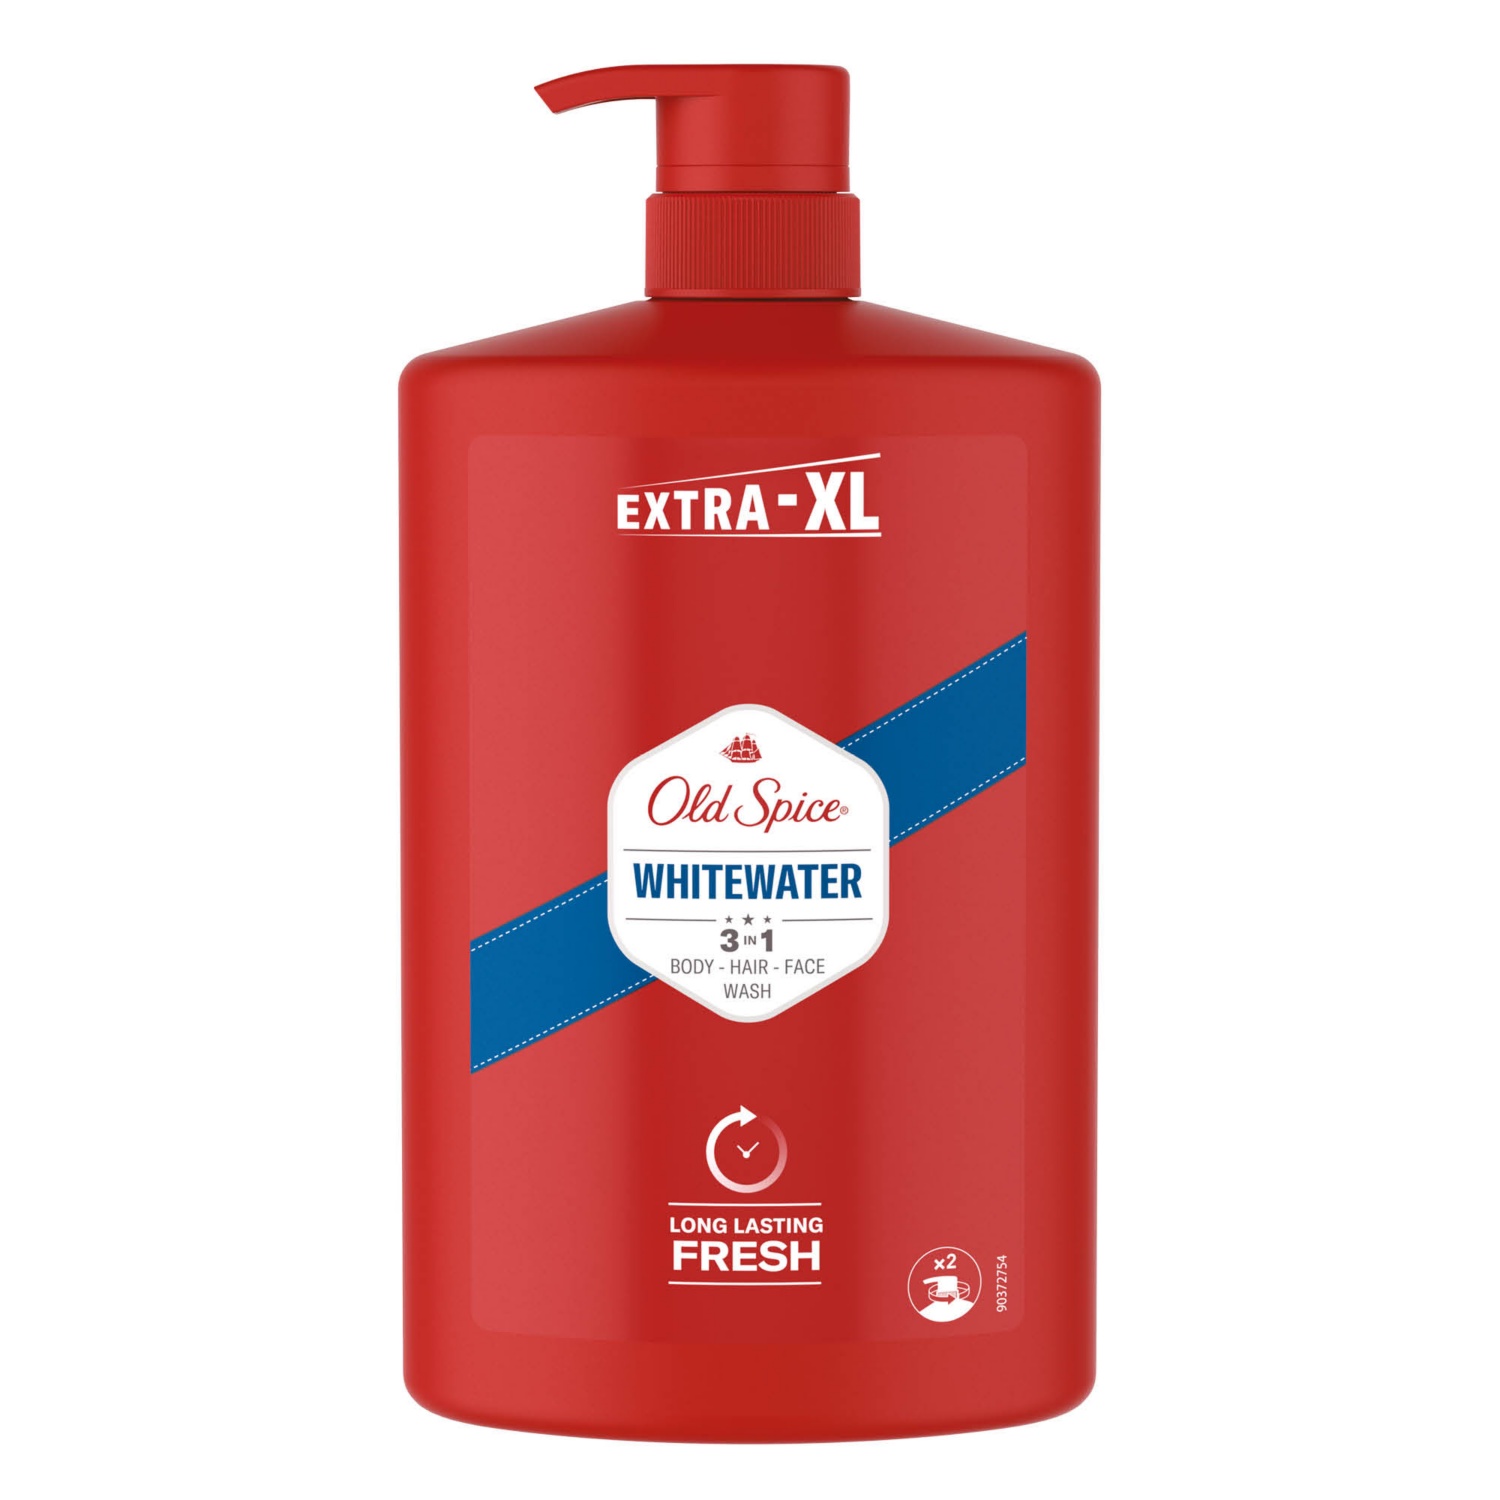 OLD SPICE Tusfürdő 3 in 1, 1 l, Whitewater